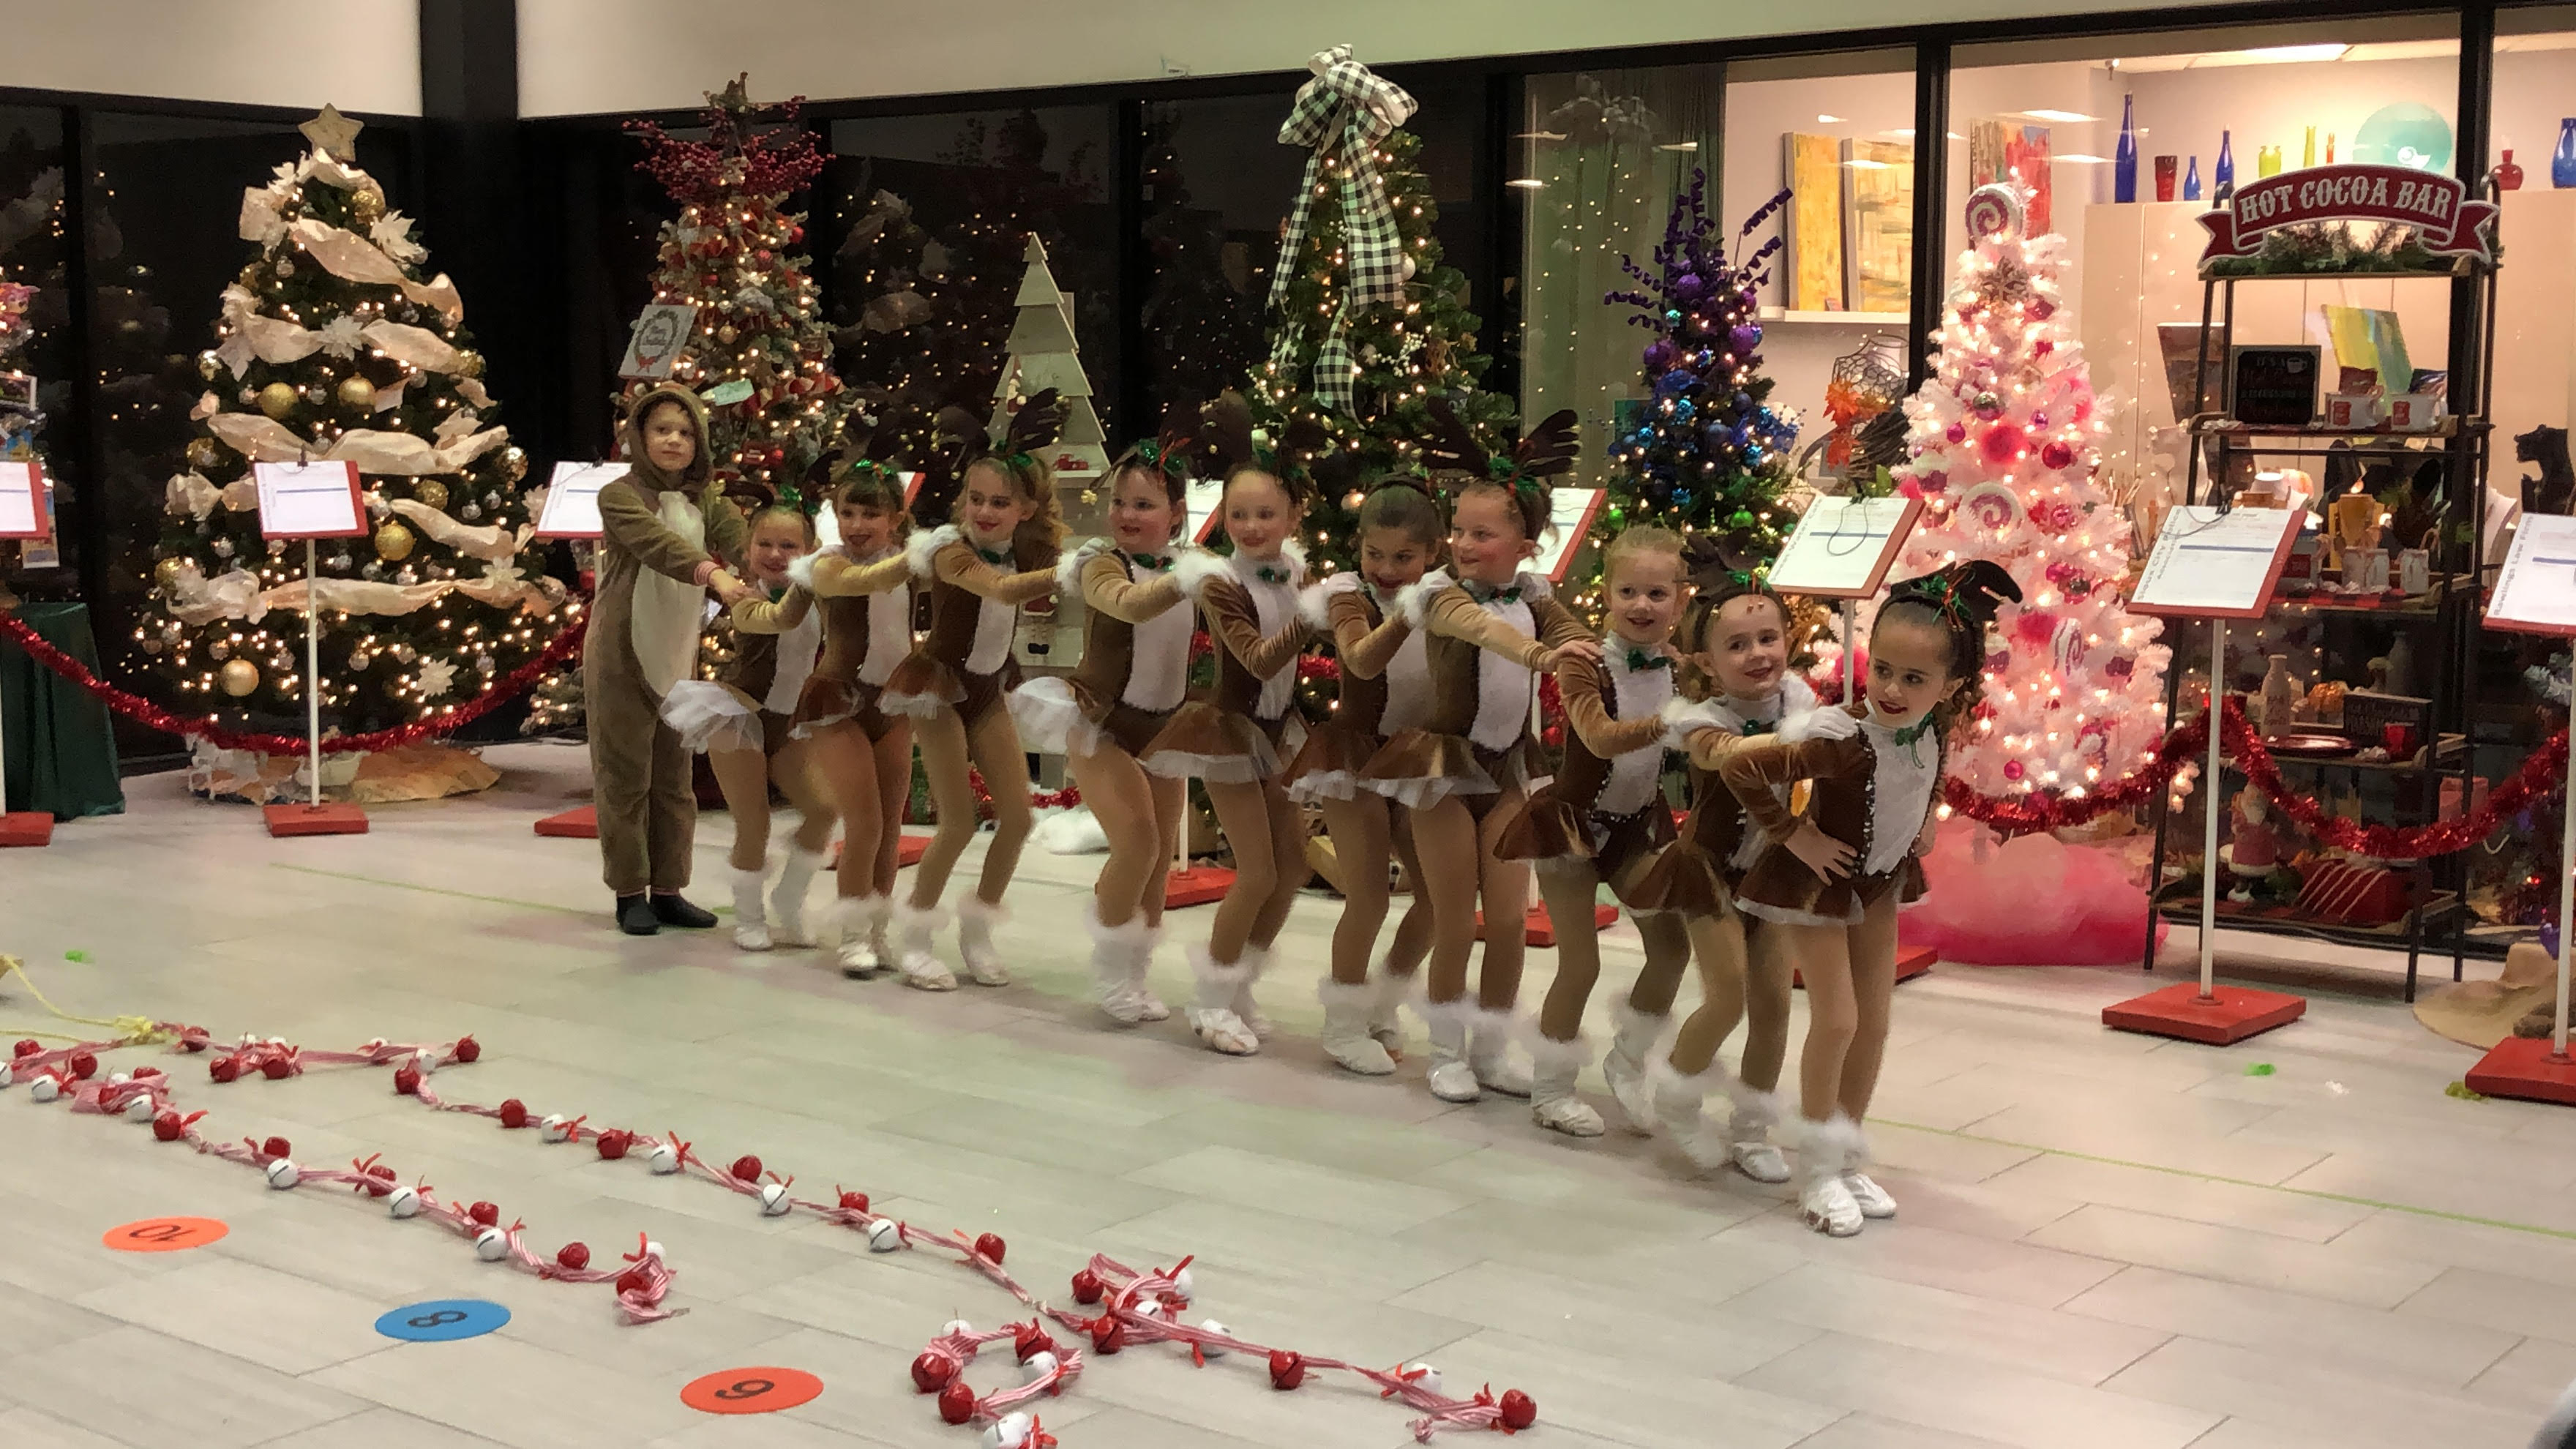 A long dance line of children in front of christmas trees